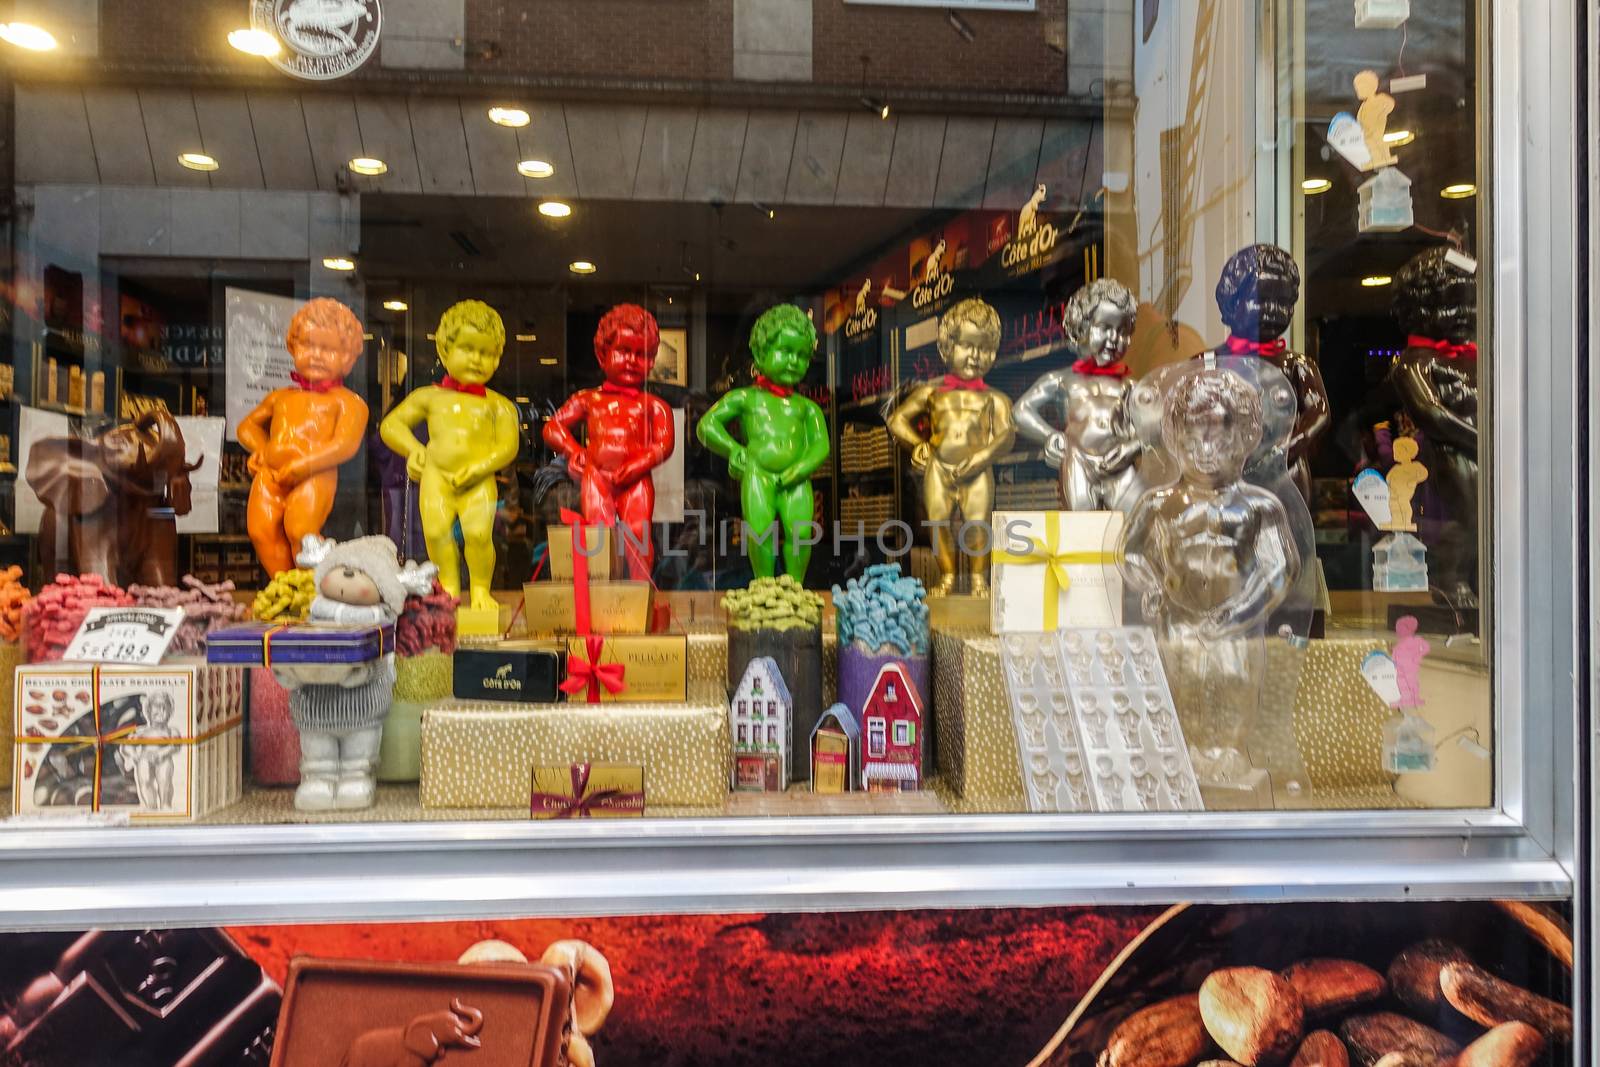 Brussels, Belgium - June 22, 2019: Large chocolate Manneken Pis statues in different colors posing on top of collection of chocolat gifts in window of confectionery store.